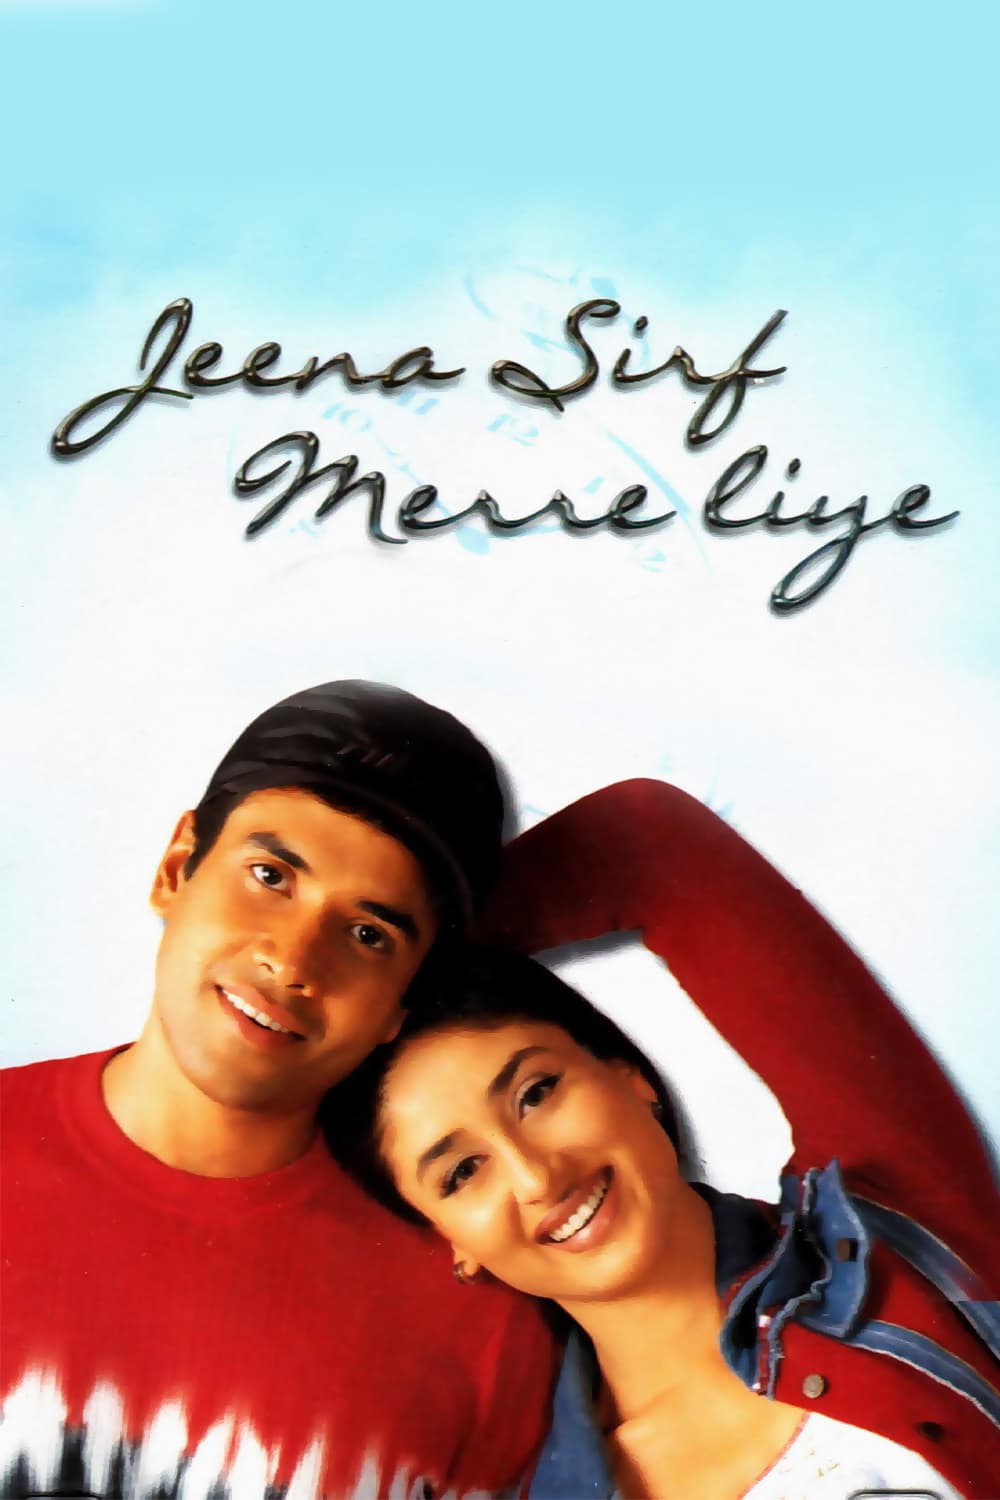 Poster for the movie "Jeena Sirf Merre Liye"